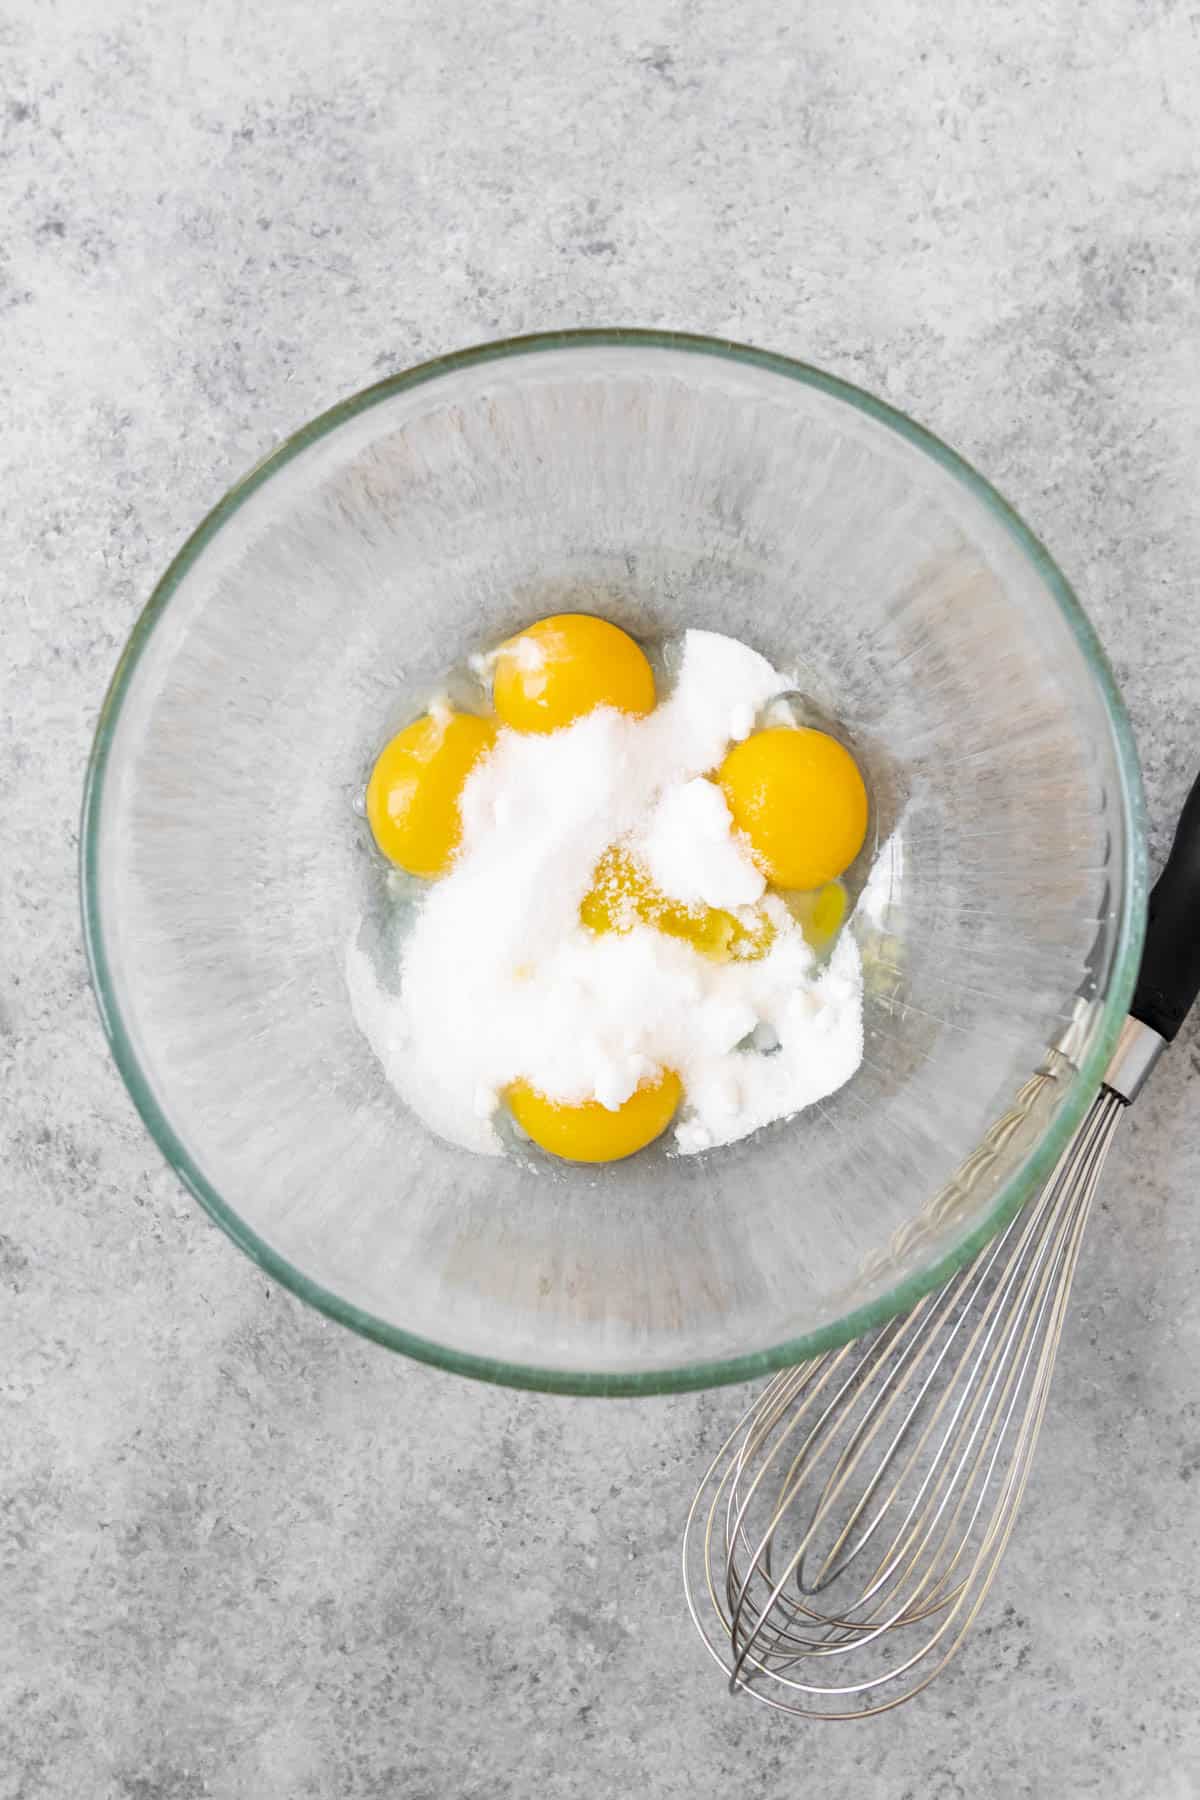 Egg yolks and sugar in a glass mixing bowl.